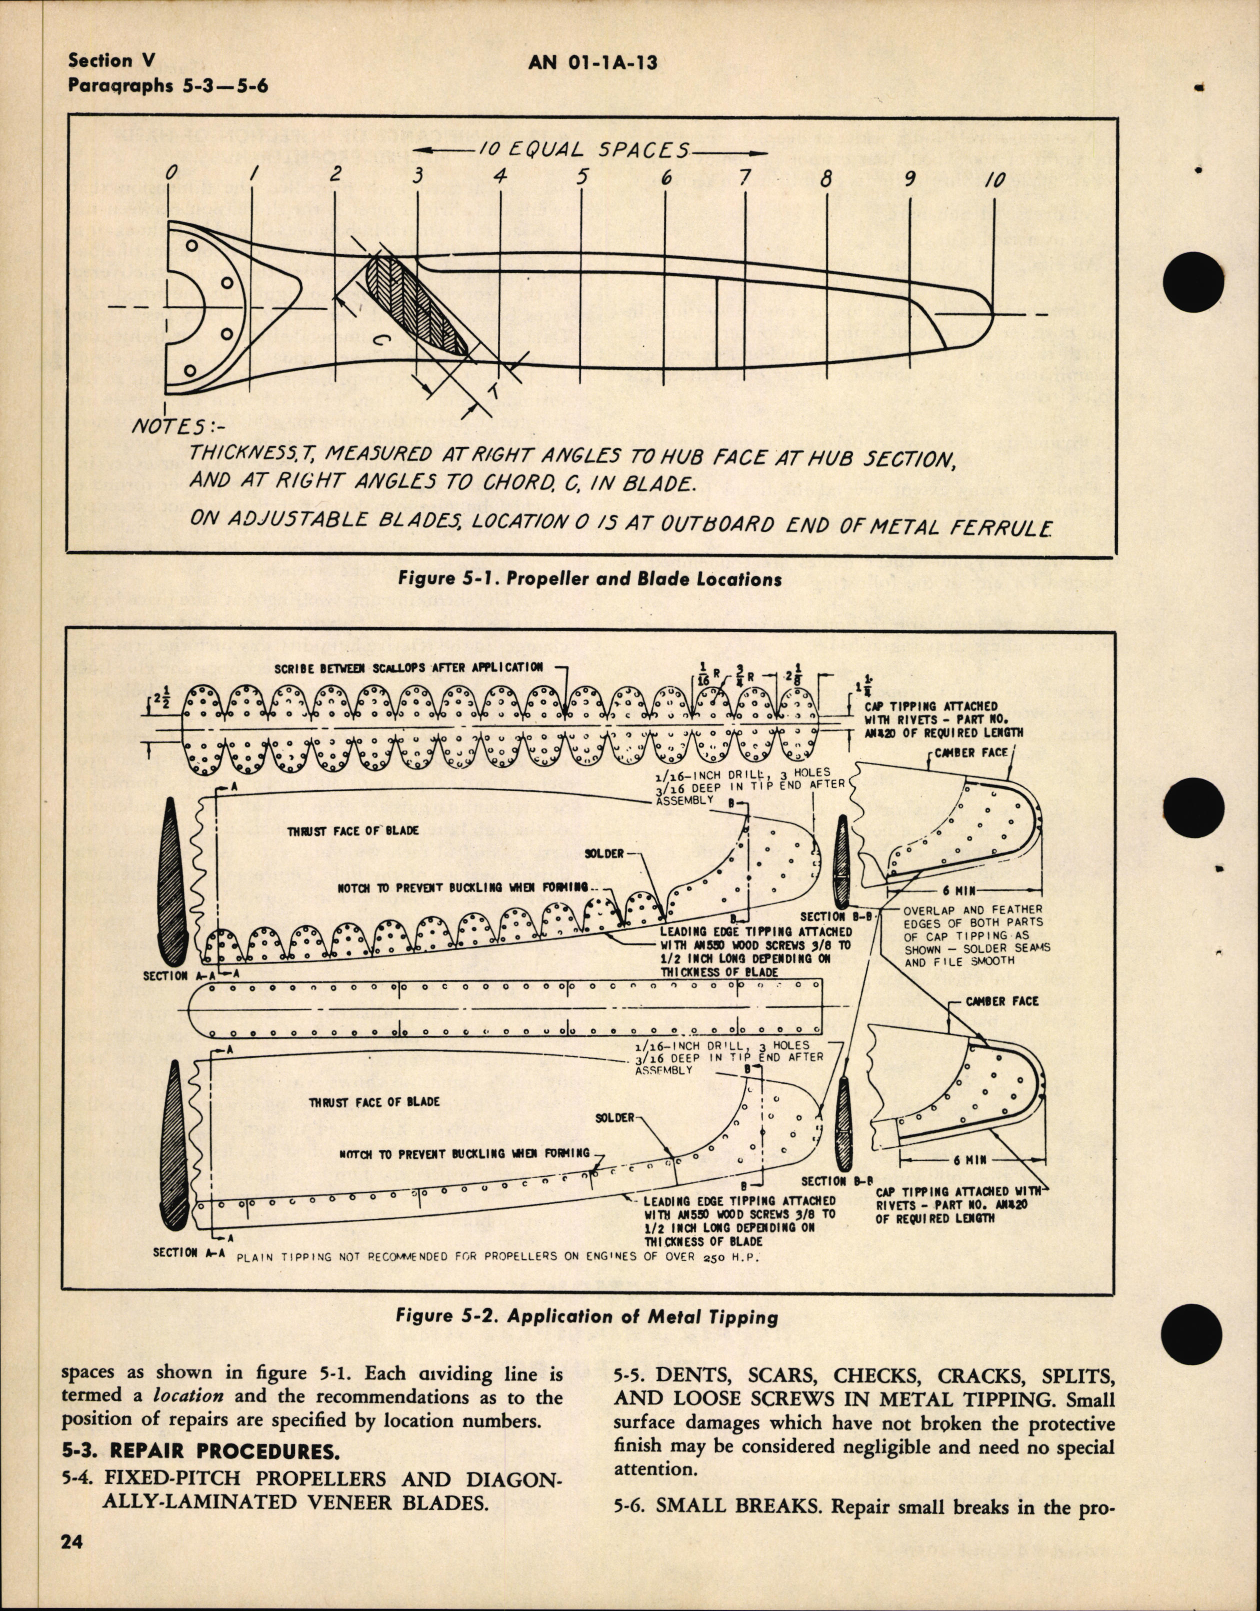 Sample page 32 from AirCorps Library document: Repair of Wood Propellers and Test Clubs